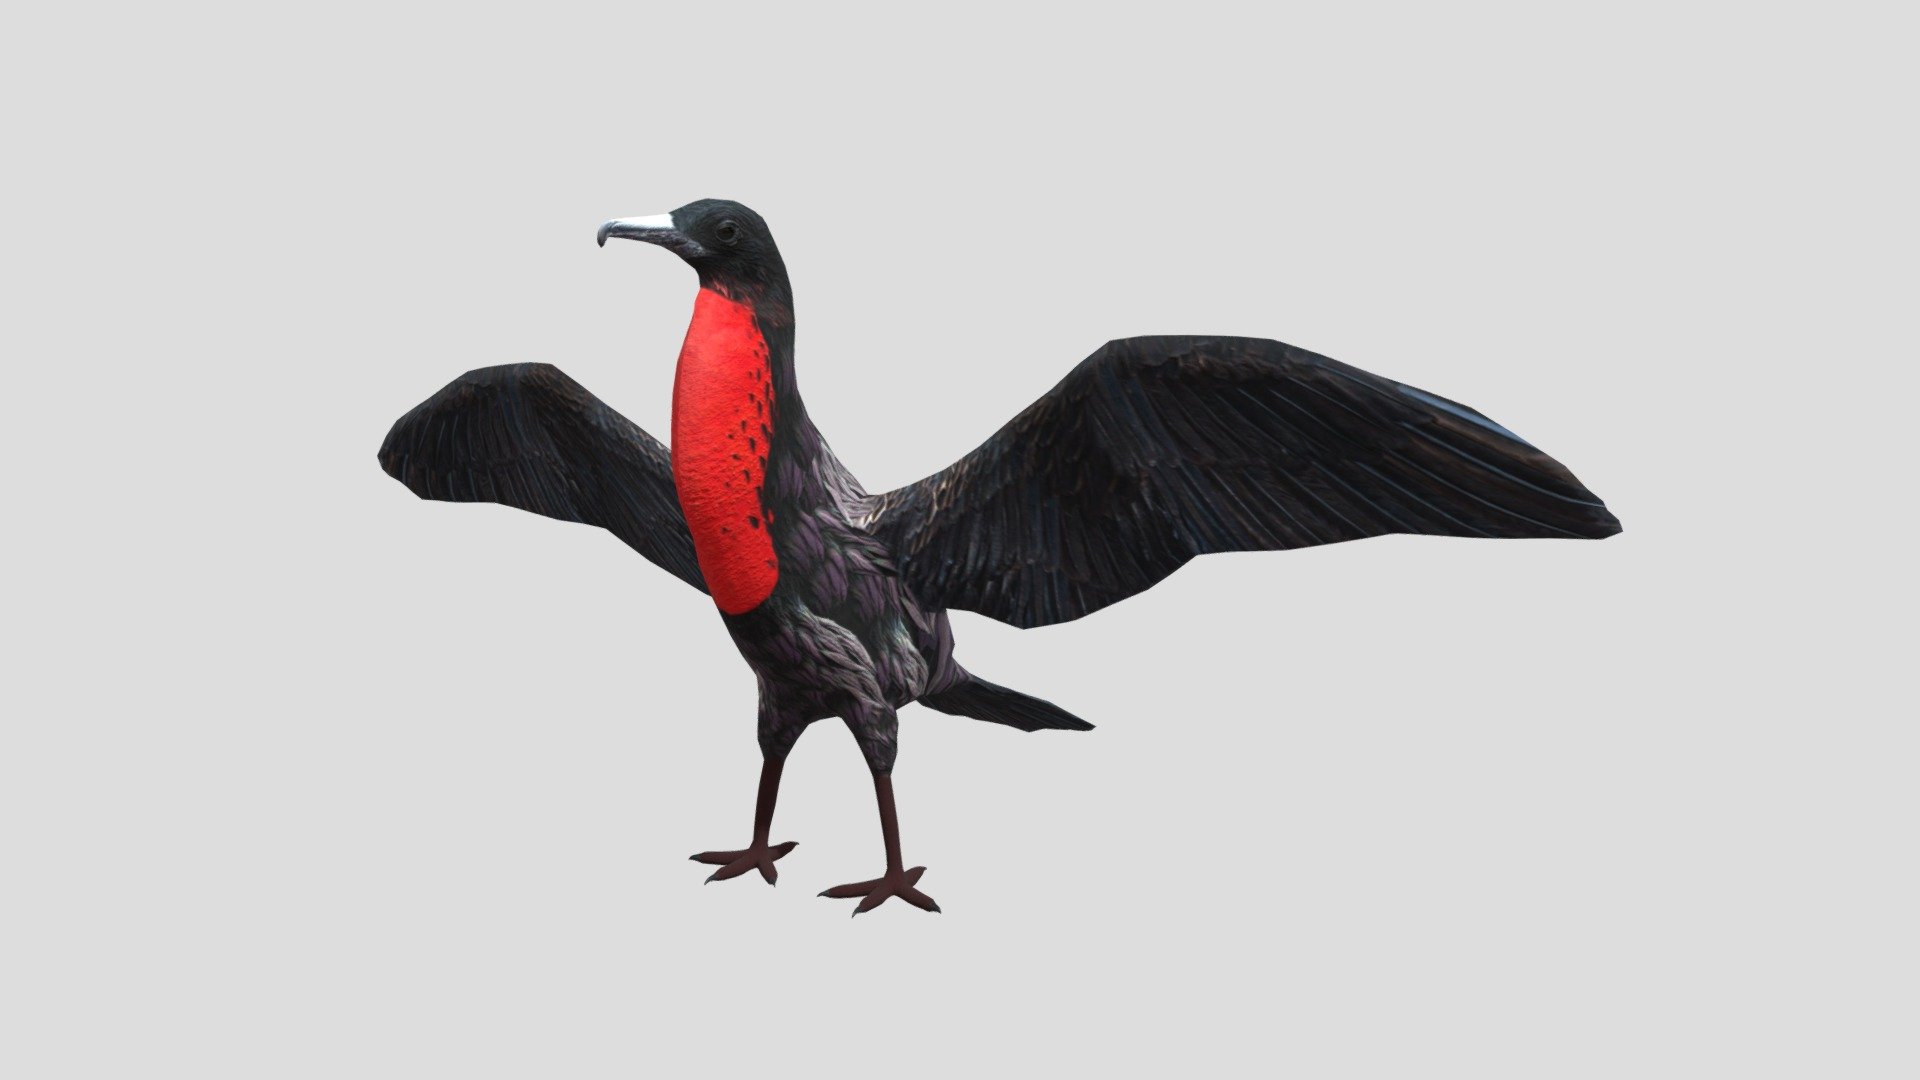 3d model of magnificent frigatebird.
The magnificent frigatebird (Fregata magnificens) is a seabird of the frigatebird family Fregatidae.
Product specification:
Objects-1pc
Textures-Color,Metalic,Roughness and Normal maps
Textures format/size -JPEG/ 4096x4096 pxls - Magnificent Frigatebird - Buy Royalty Free 3D model by rmilushev 3d model